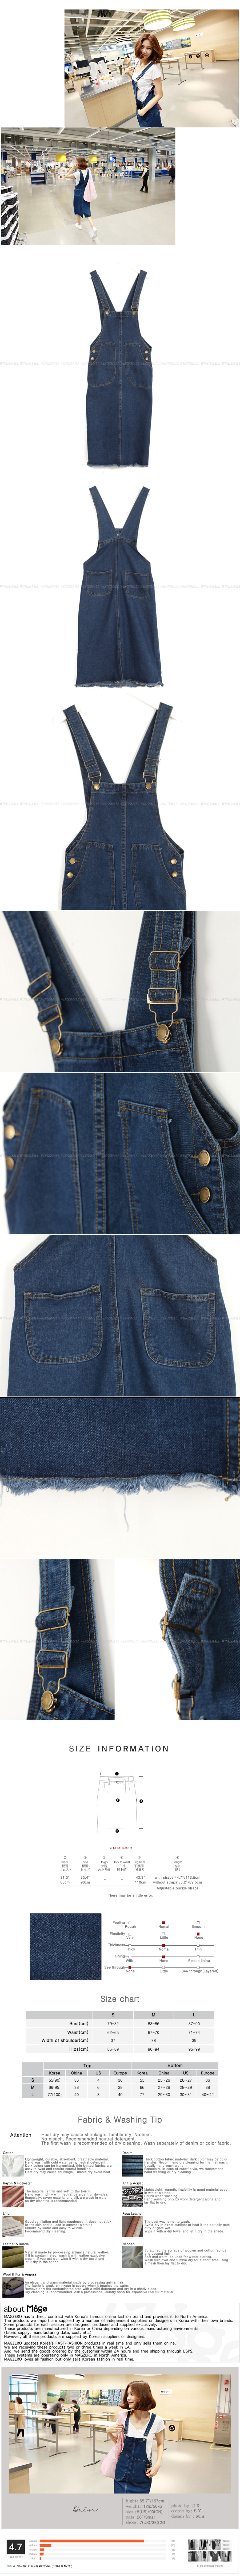 [Limited Quantity Sale] Denim Overall Dress One Size L(36-38)